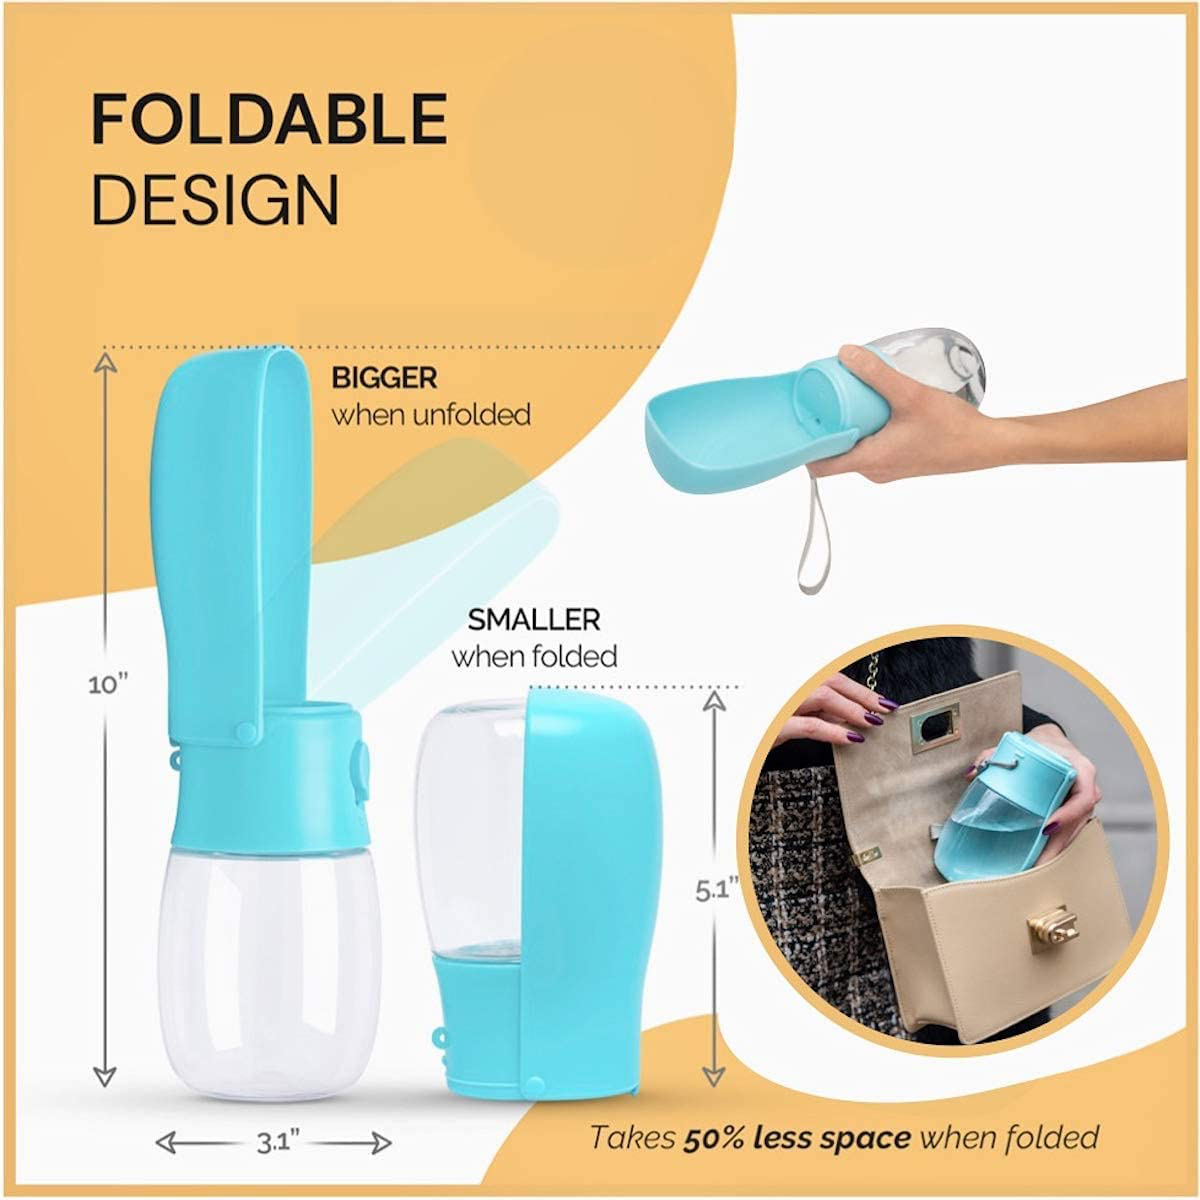 NEW PET SOLUTIONS Foldable Portable Dog Water Bottle for Walking, Hikes & Travel | Compact Easy-To-Carry Pet Water Bottle with Foldable Bowl | Pawesome Water Dispenser for Dogs on the Go | Two Sizes.